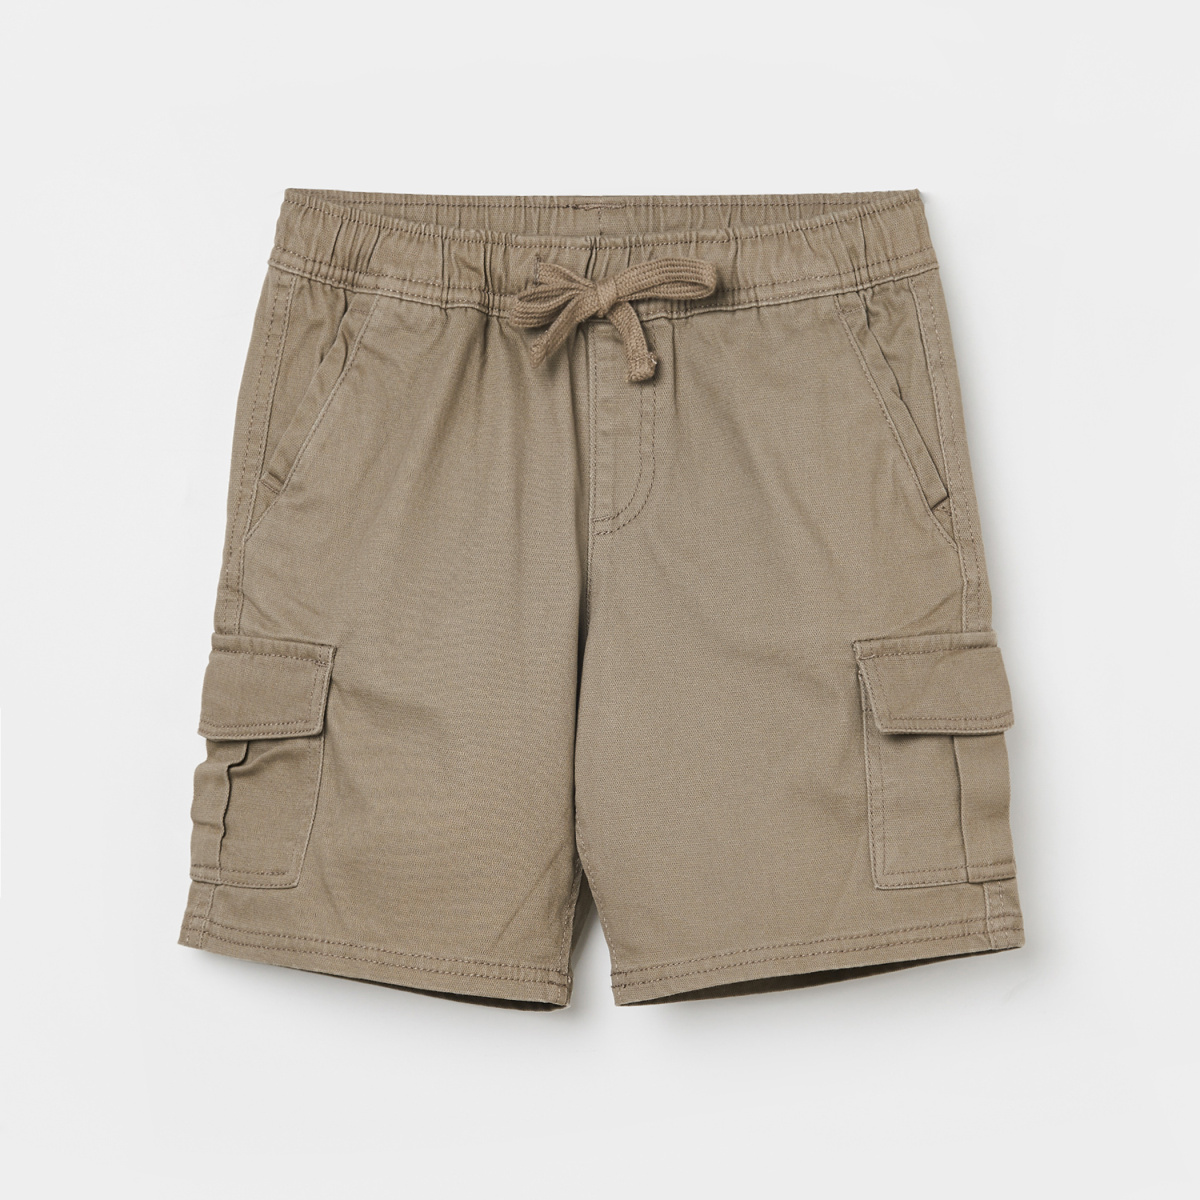 FAME FOREVER YOUNG Boys Solid Elasticated Shorts